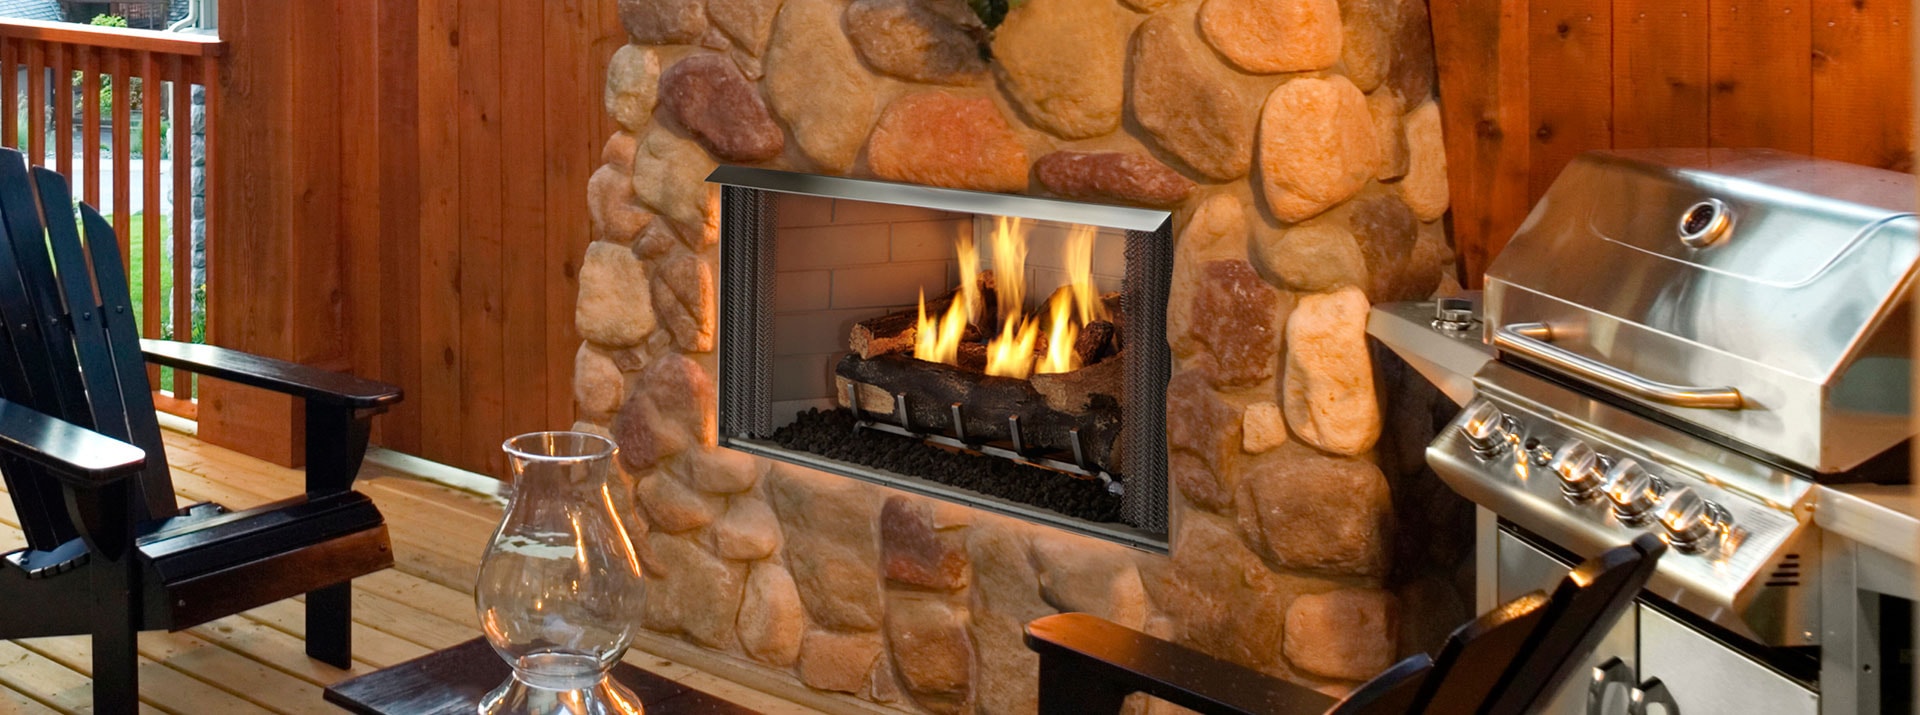 Vent Free Wall Mount Gas Fireplace Best Of Outdoor Lifestyles Villa Gas Pact Outdoor Fireplace